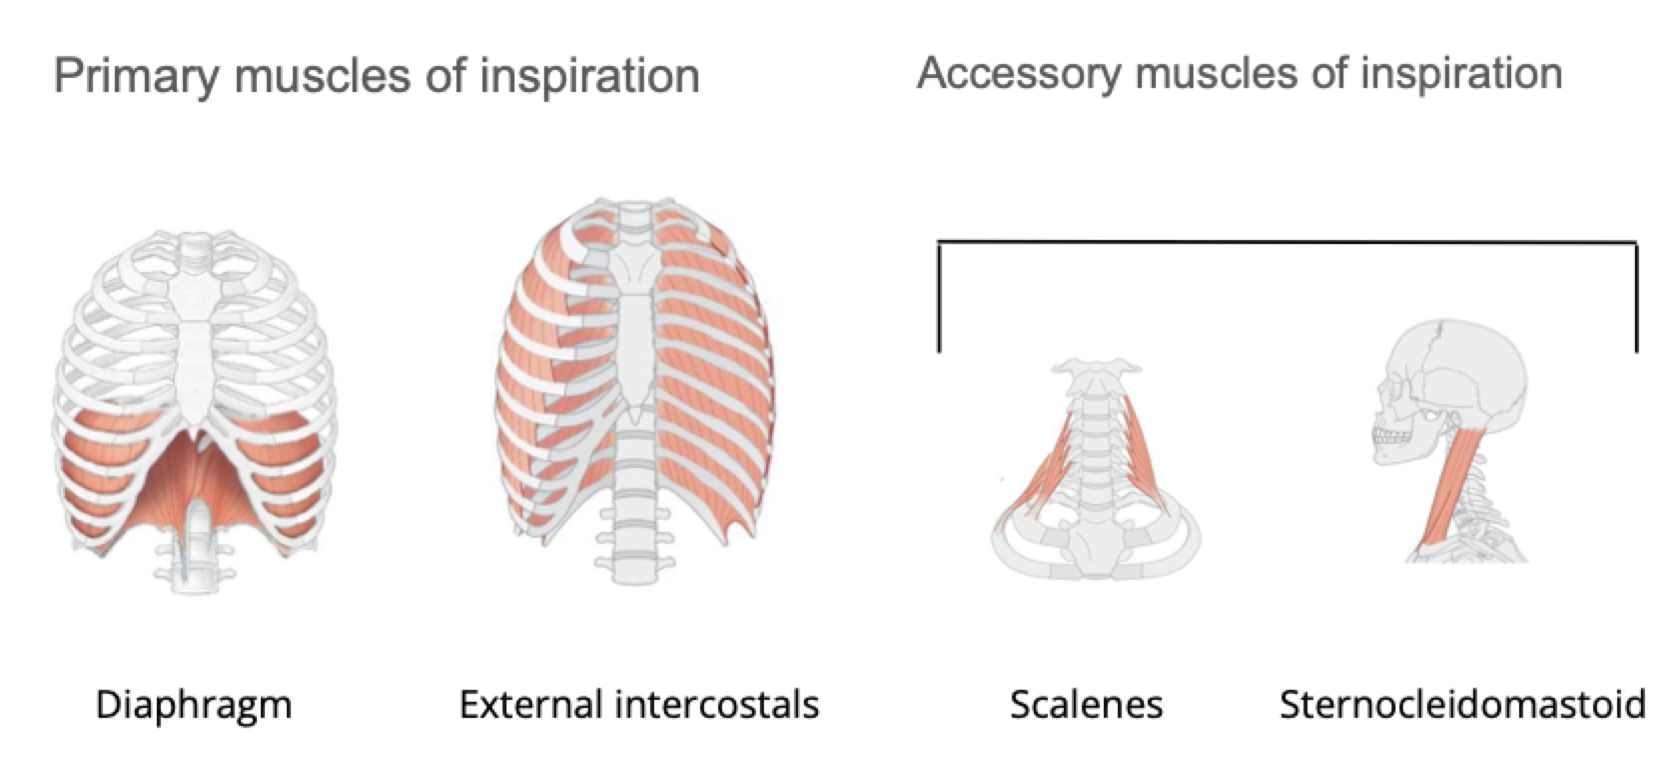 <p><strong>Primary muscles of inspiration</strong>: Diaphragm, External intercostals</p><p><strong>Accessory muscles of inspiration</strong>: Scalenes, Sternocleidomastoid</p>